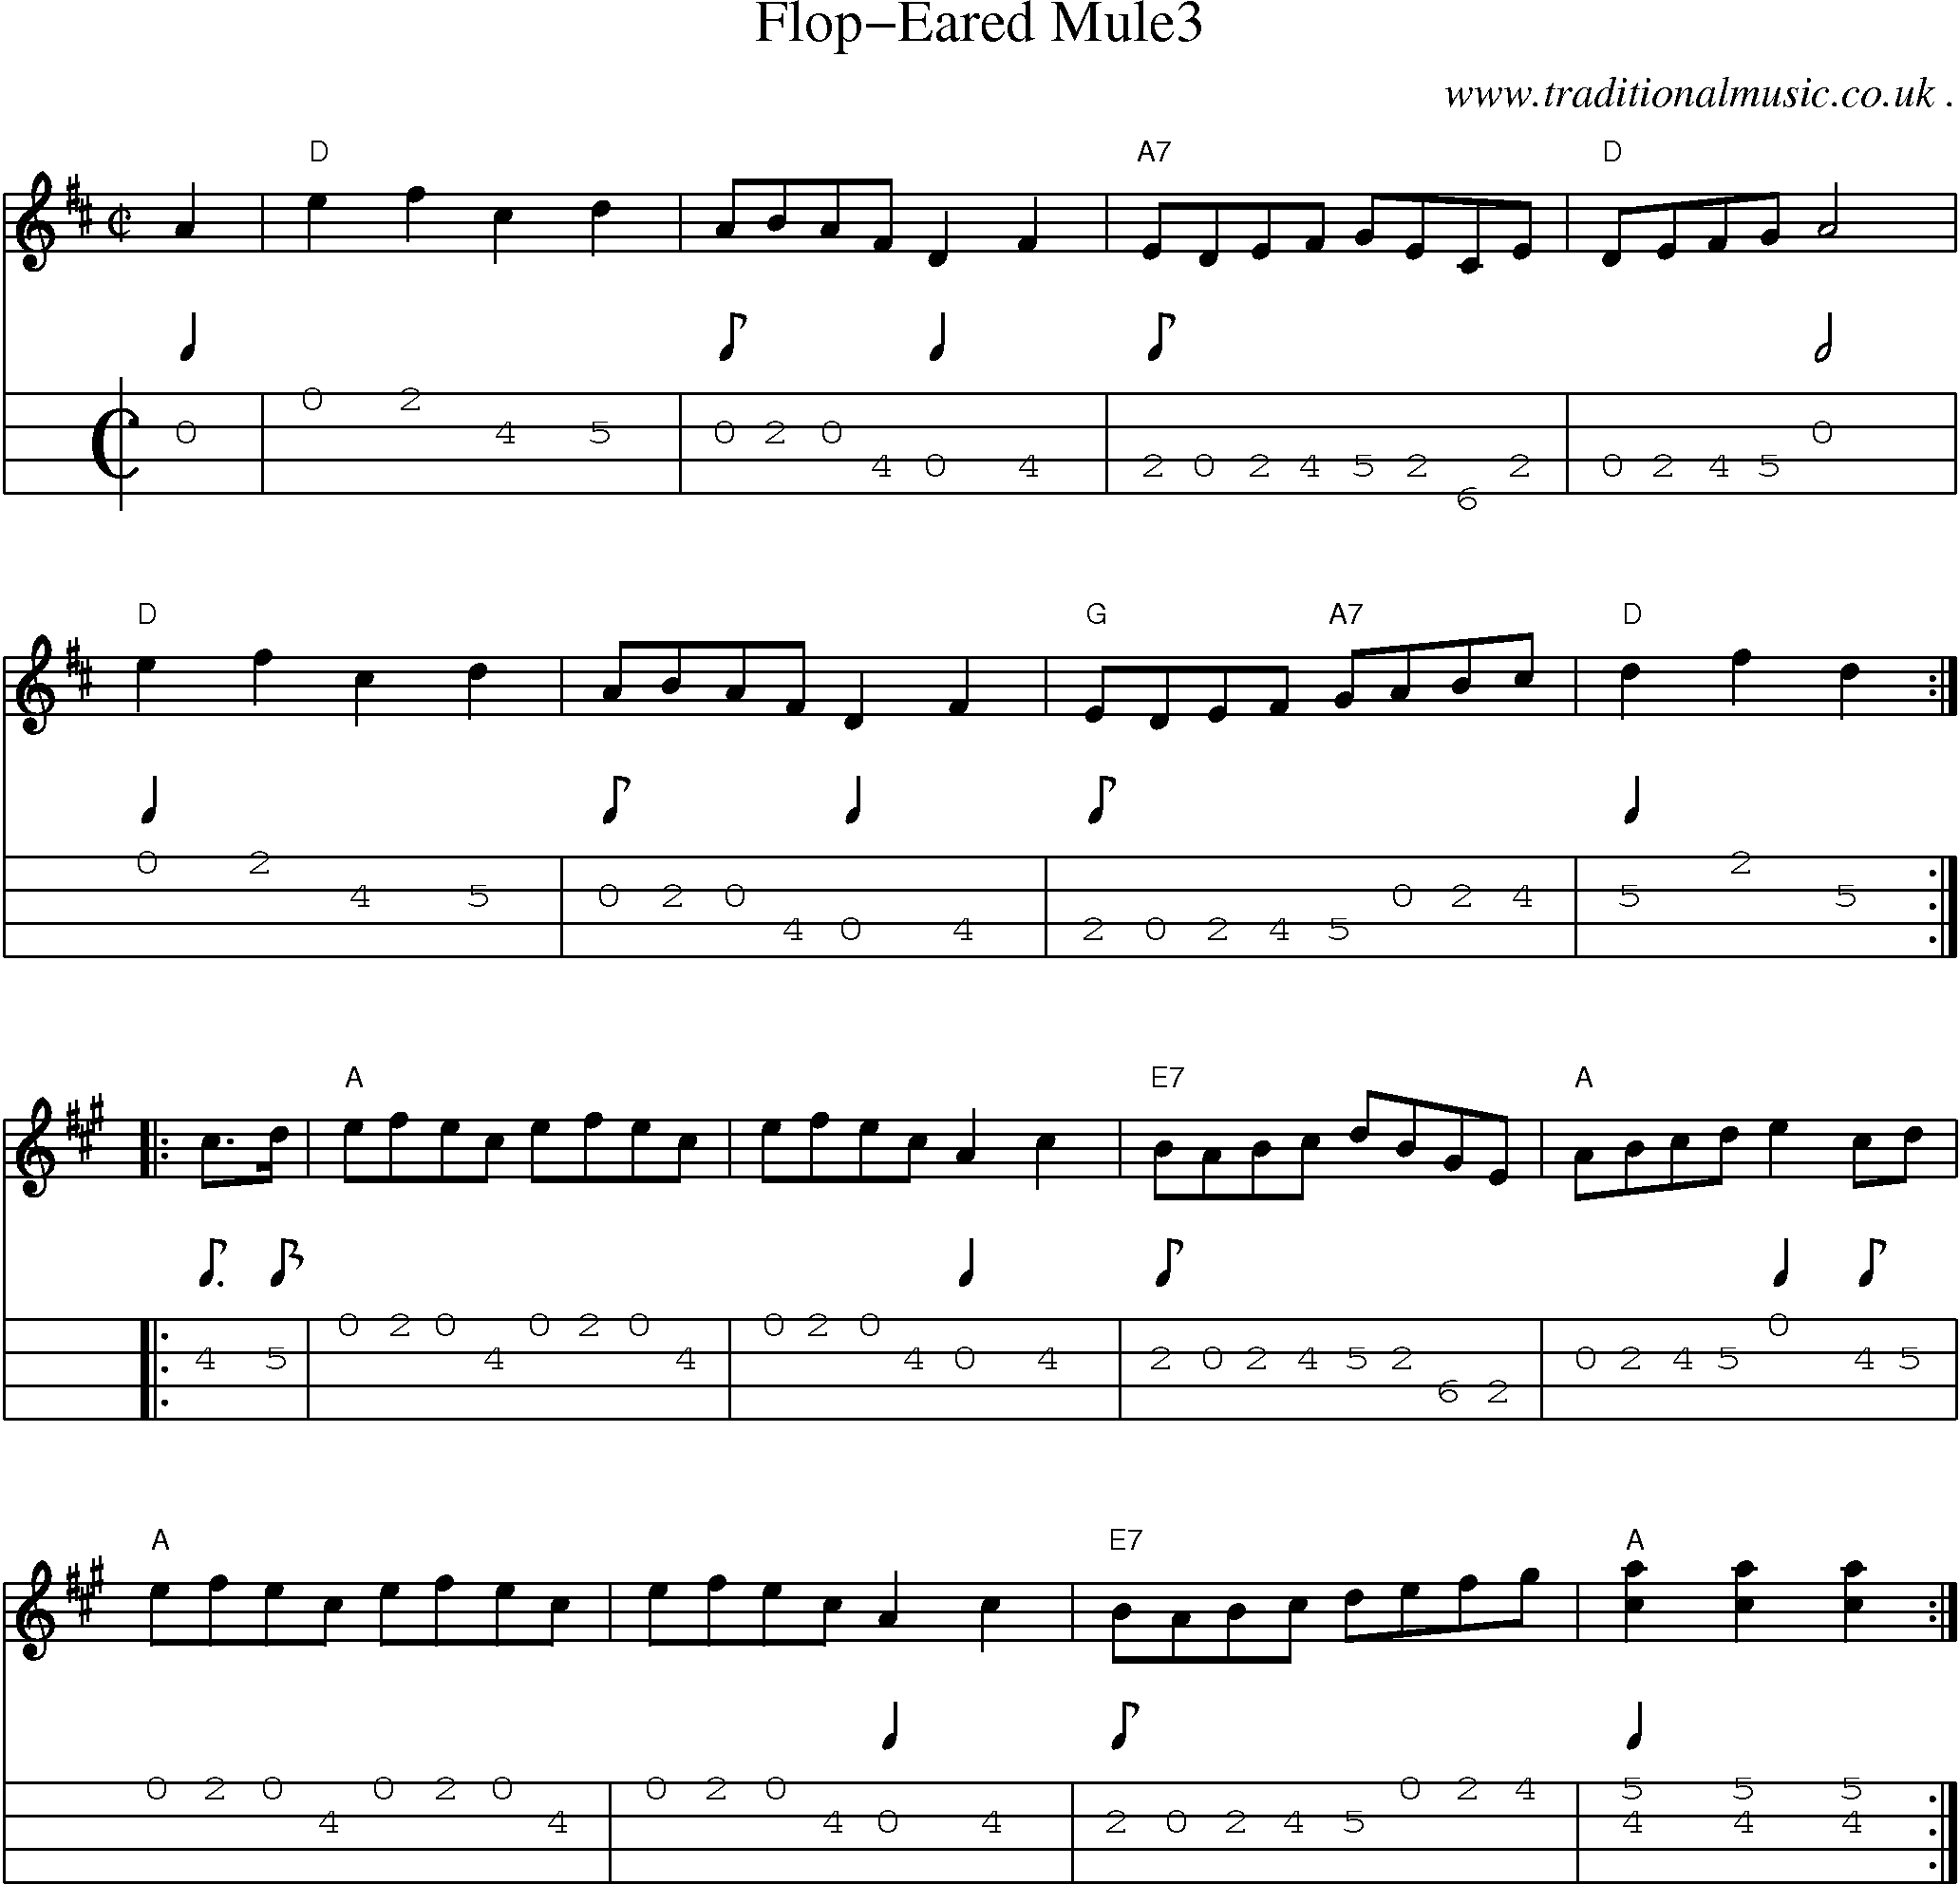 Music Score and Mandolin Tabs for Flop-eared Mule3